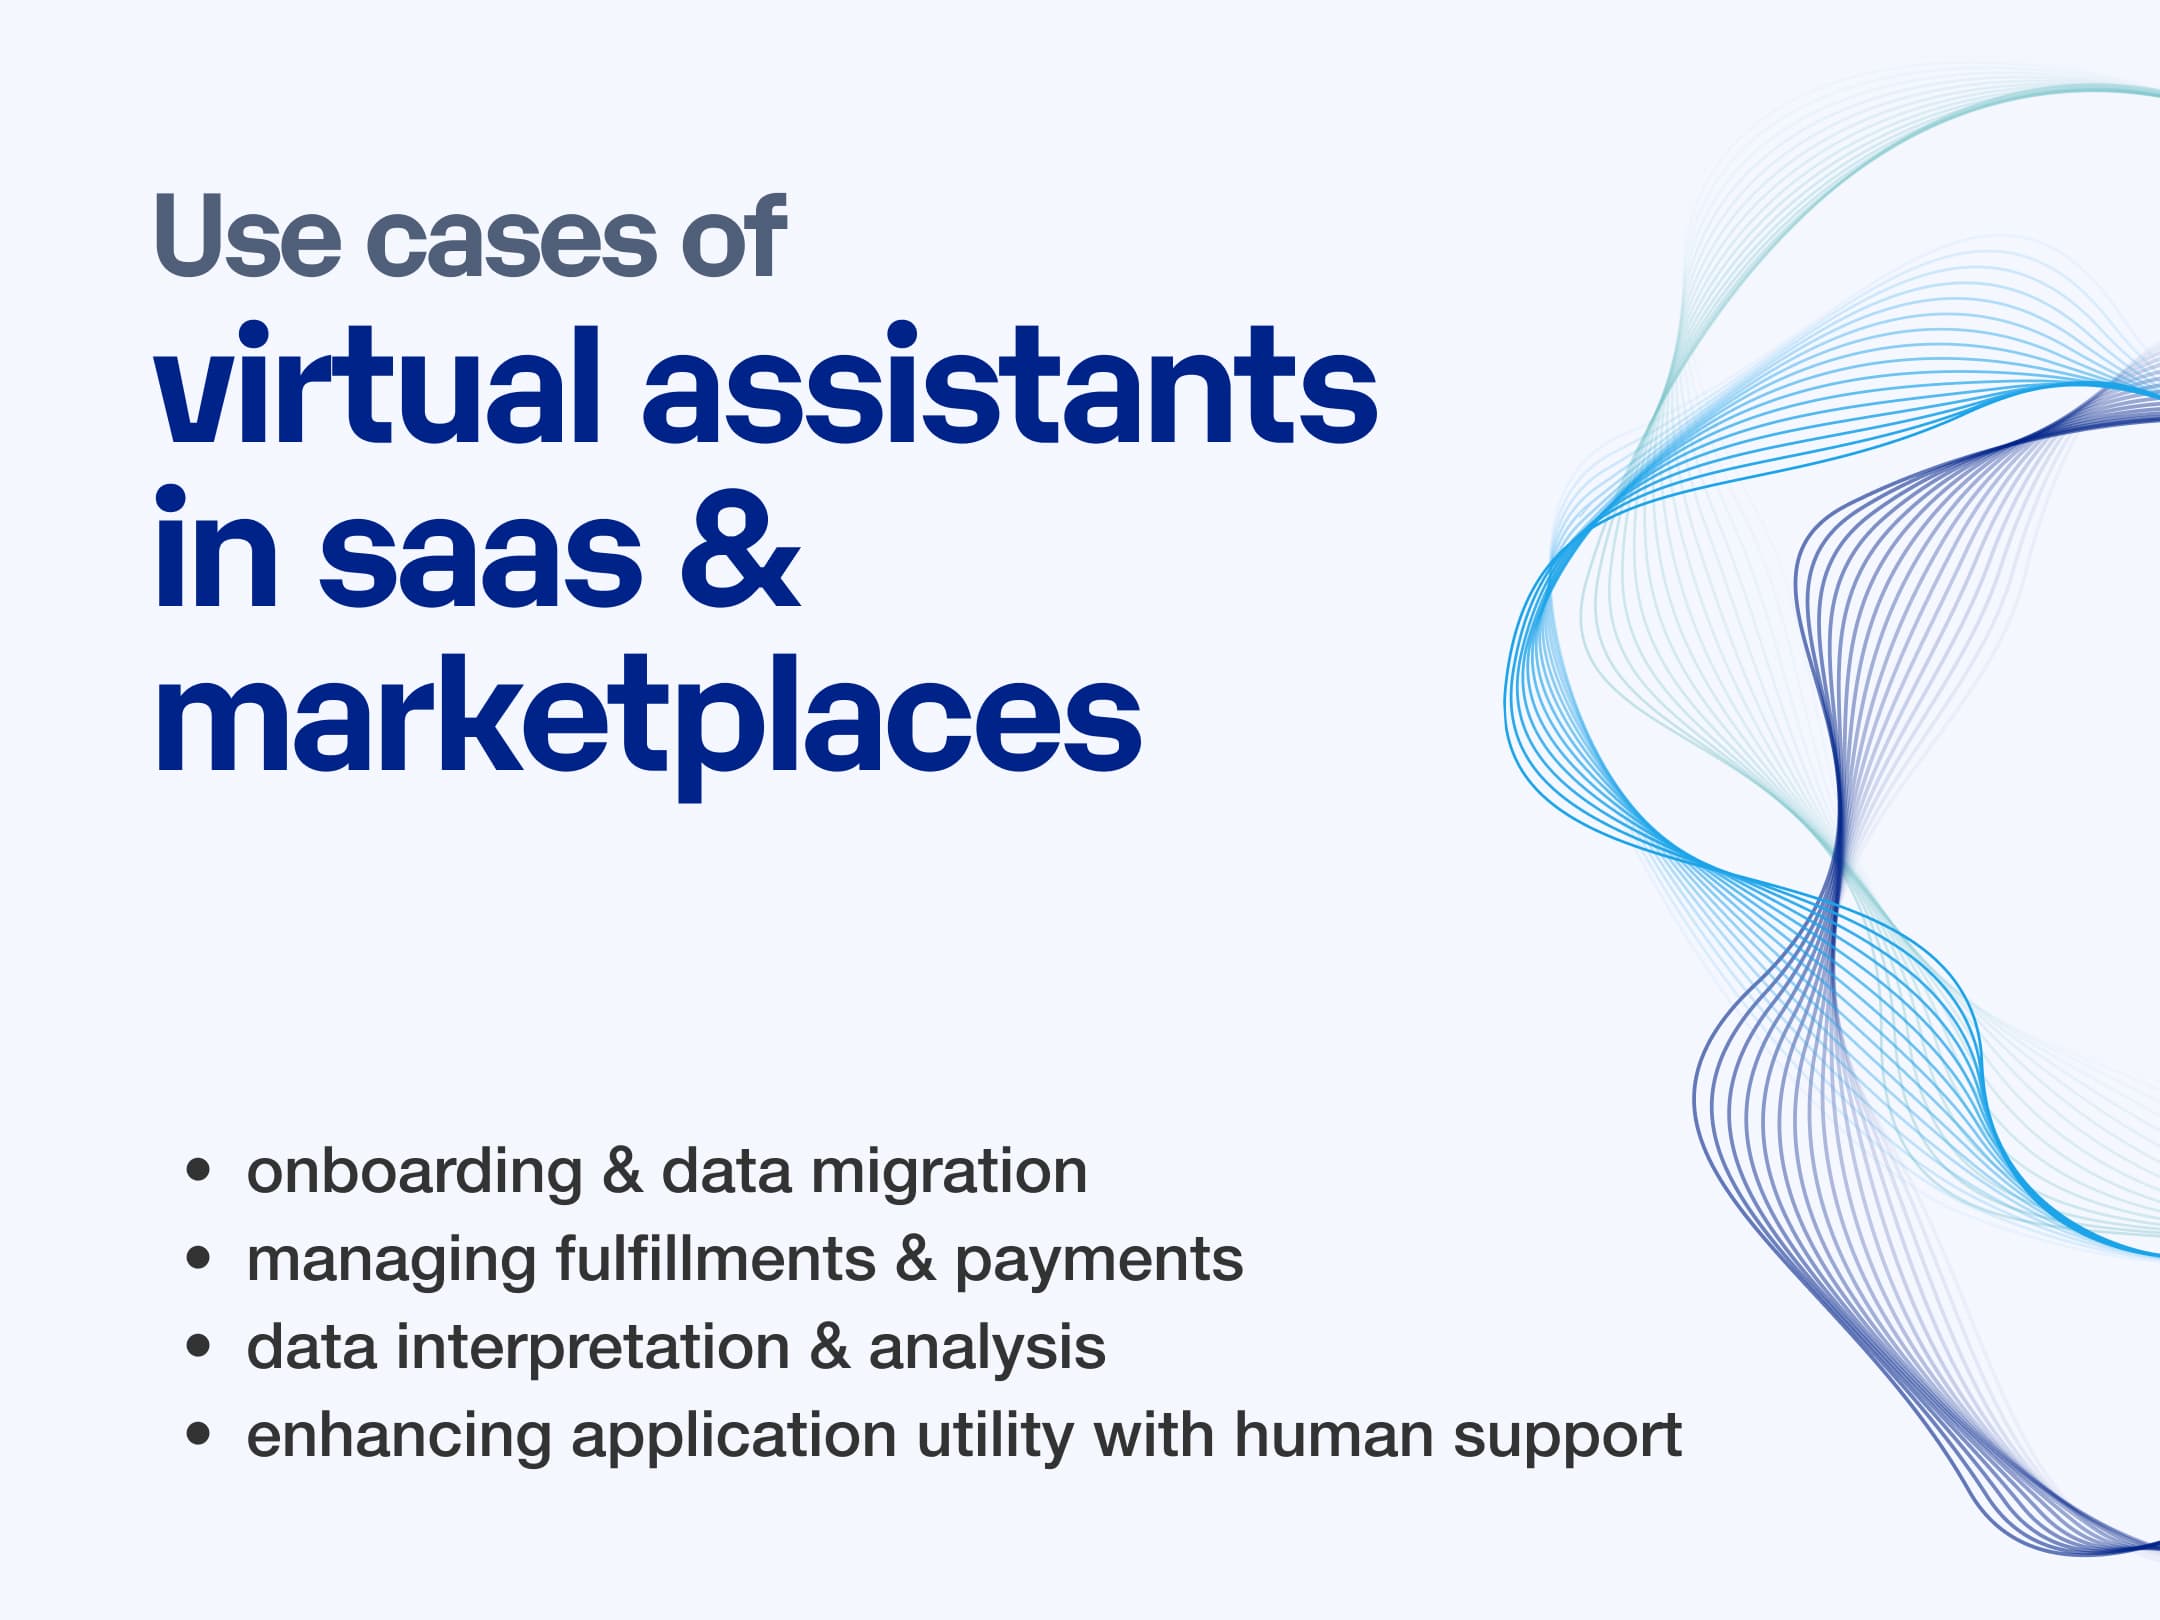 Use Cases of Virtual Assistants in SaaS & Marketplaces